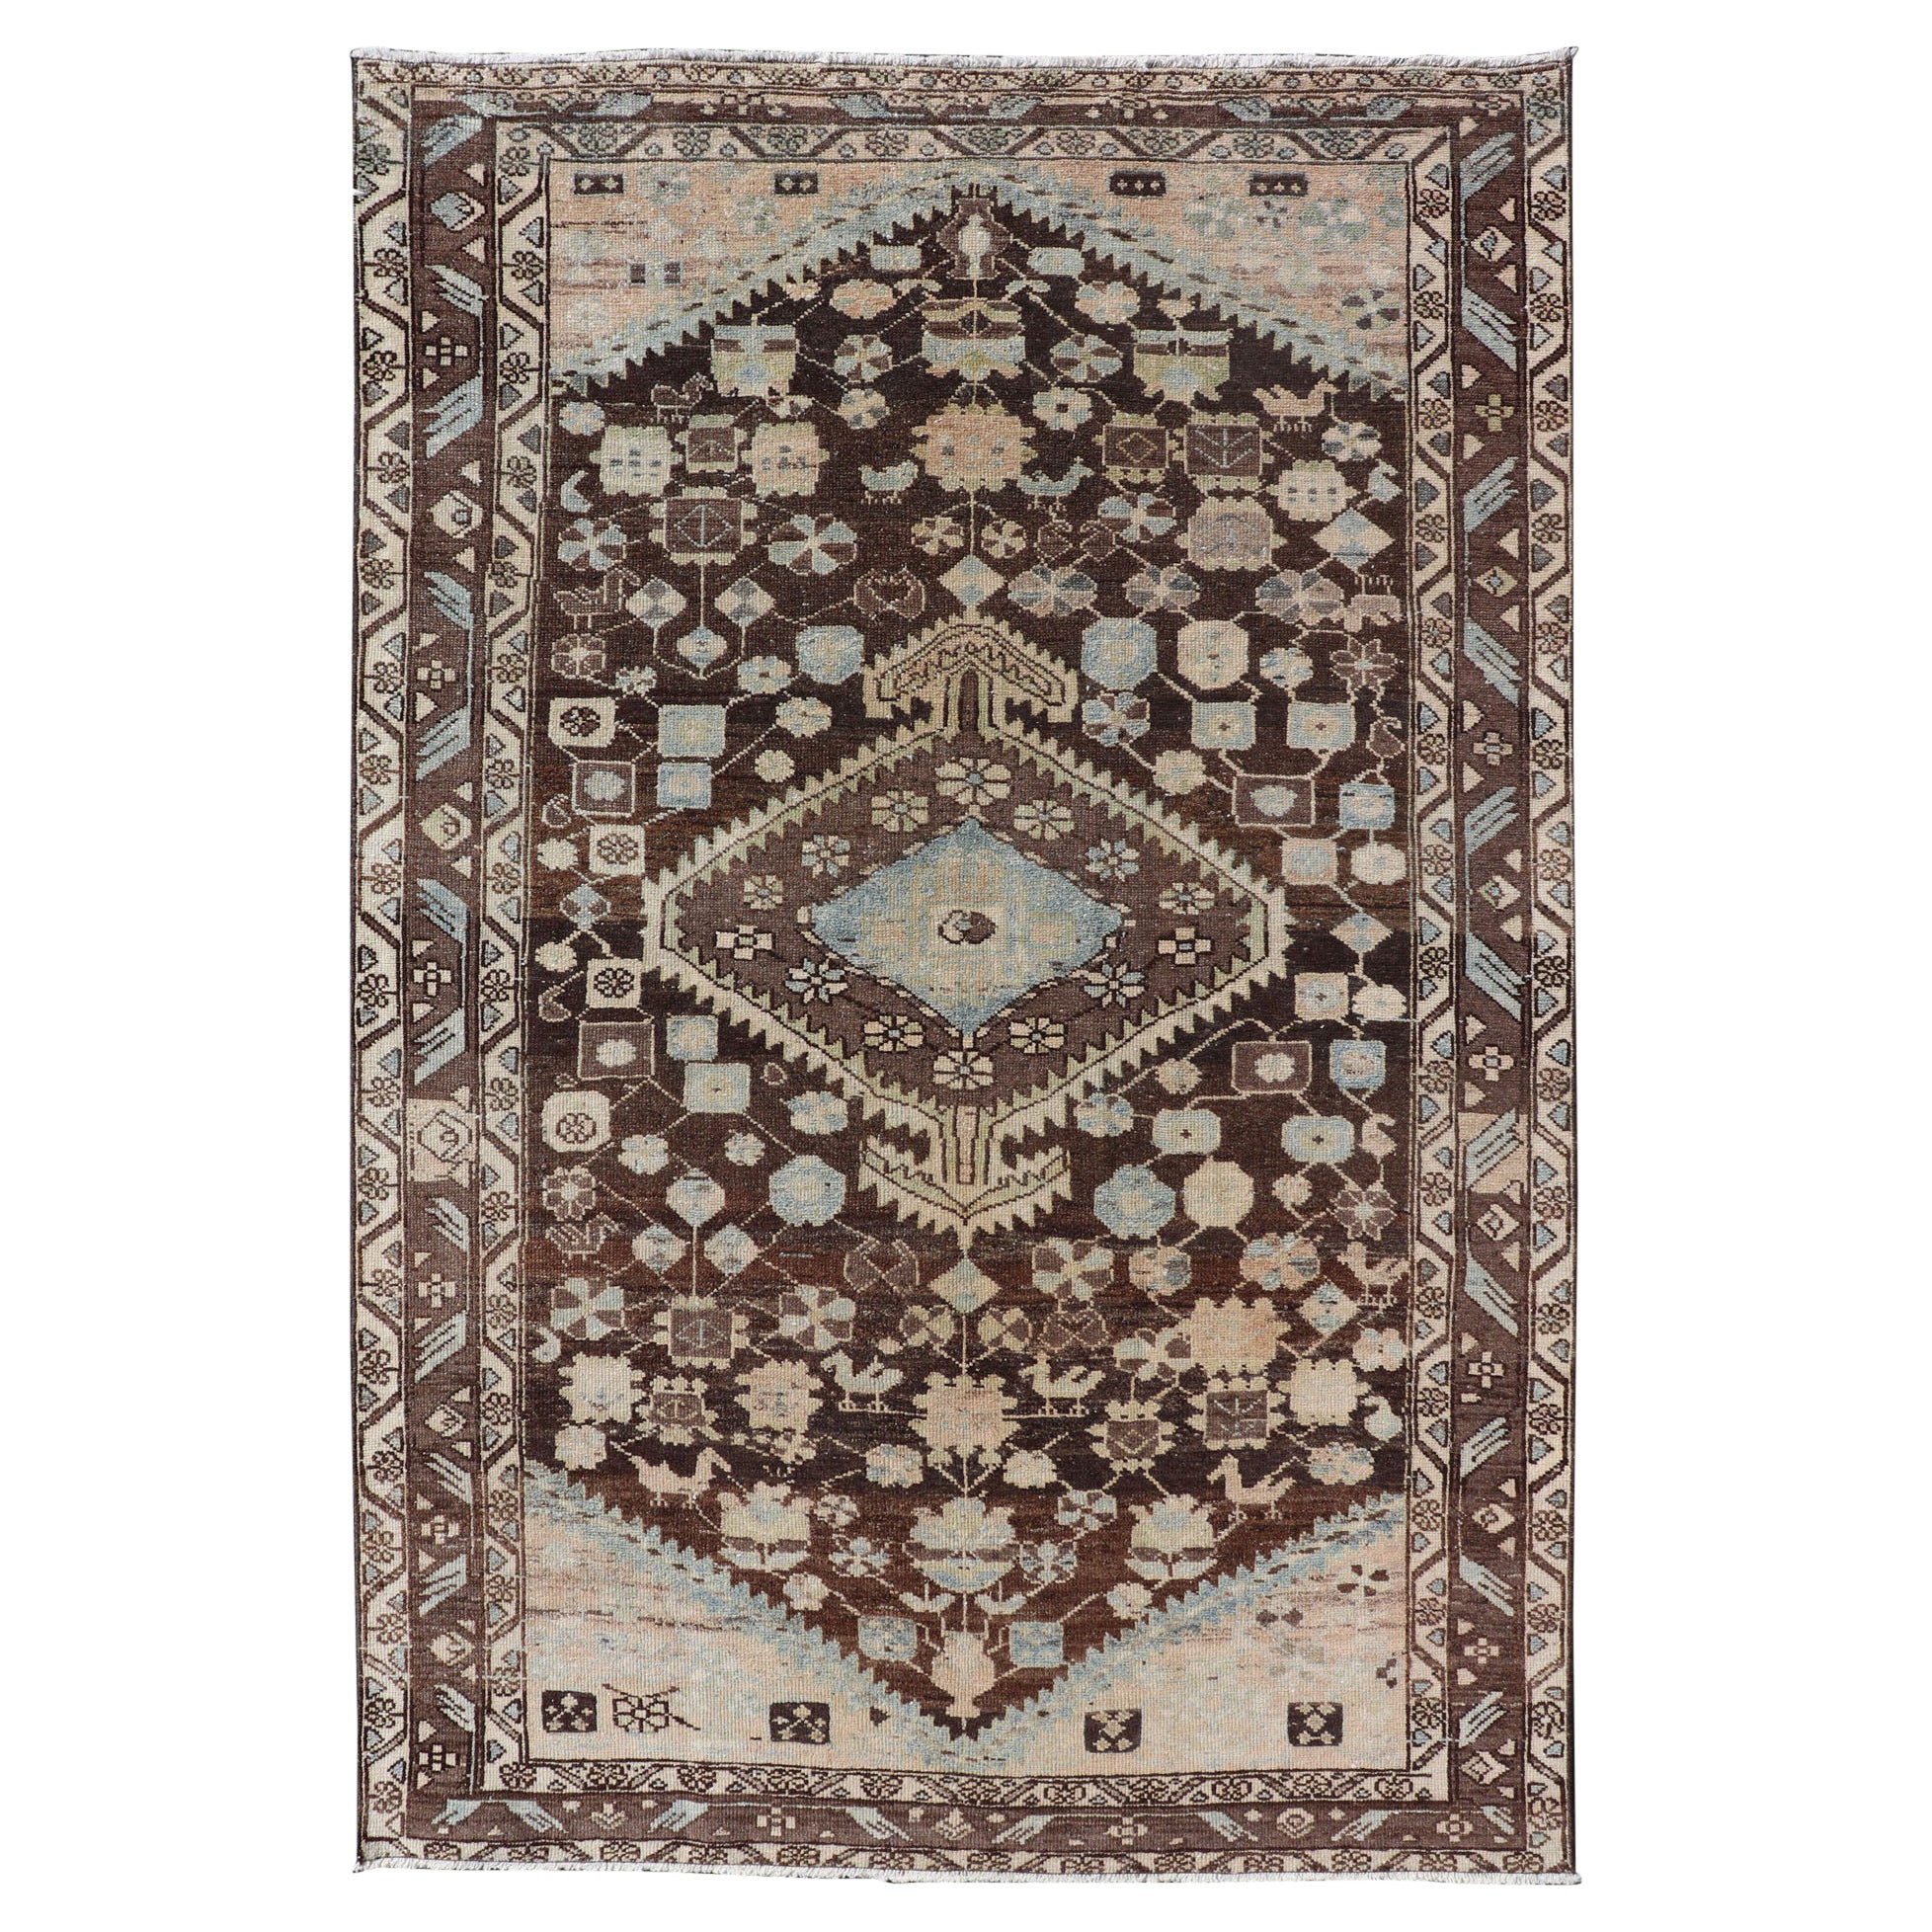 Earthy Tone Vintage Persian Hamadan Rug with All-Over Pattern and Browns